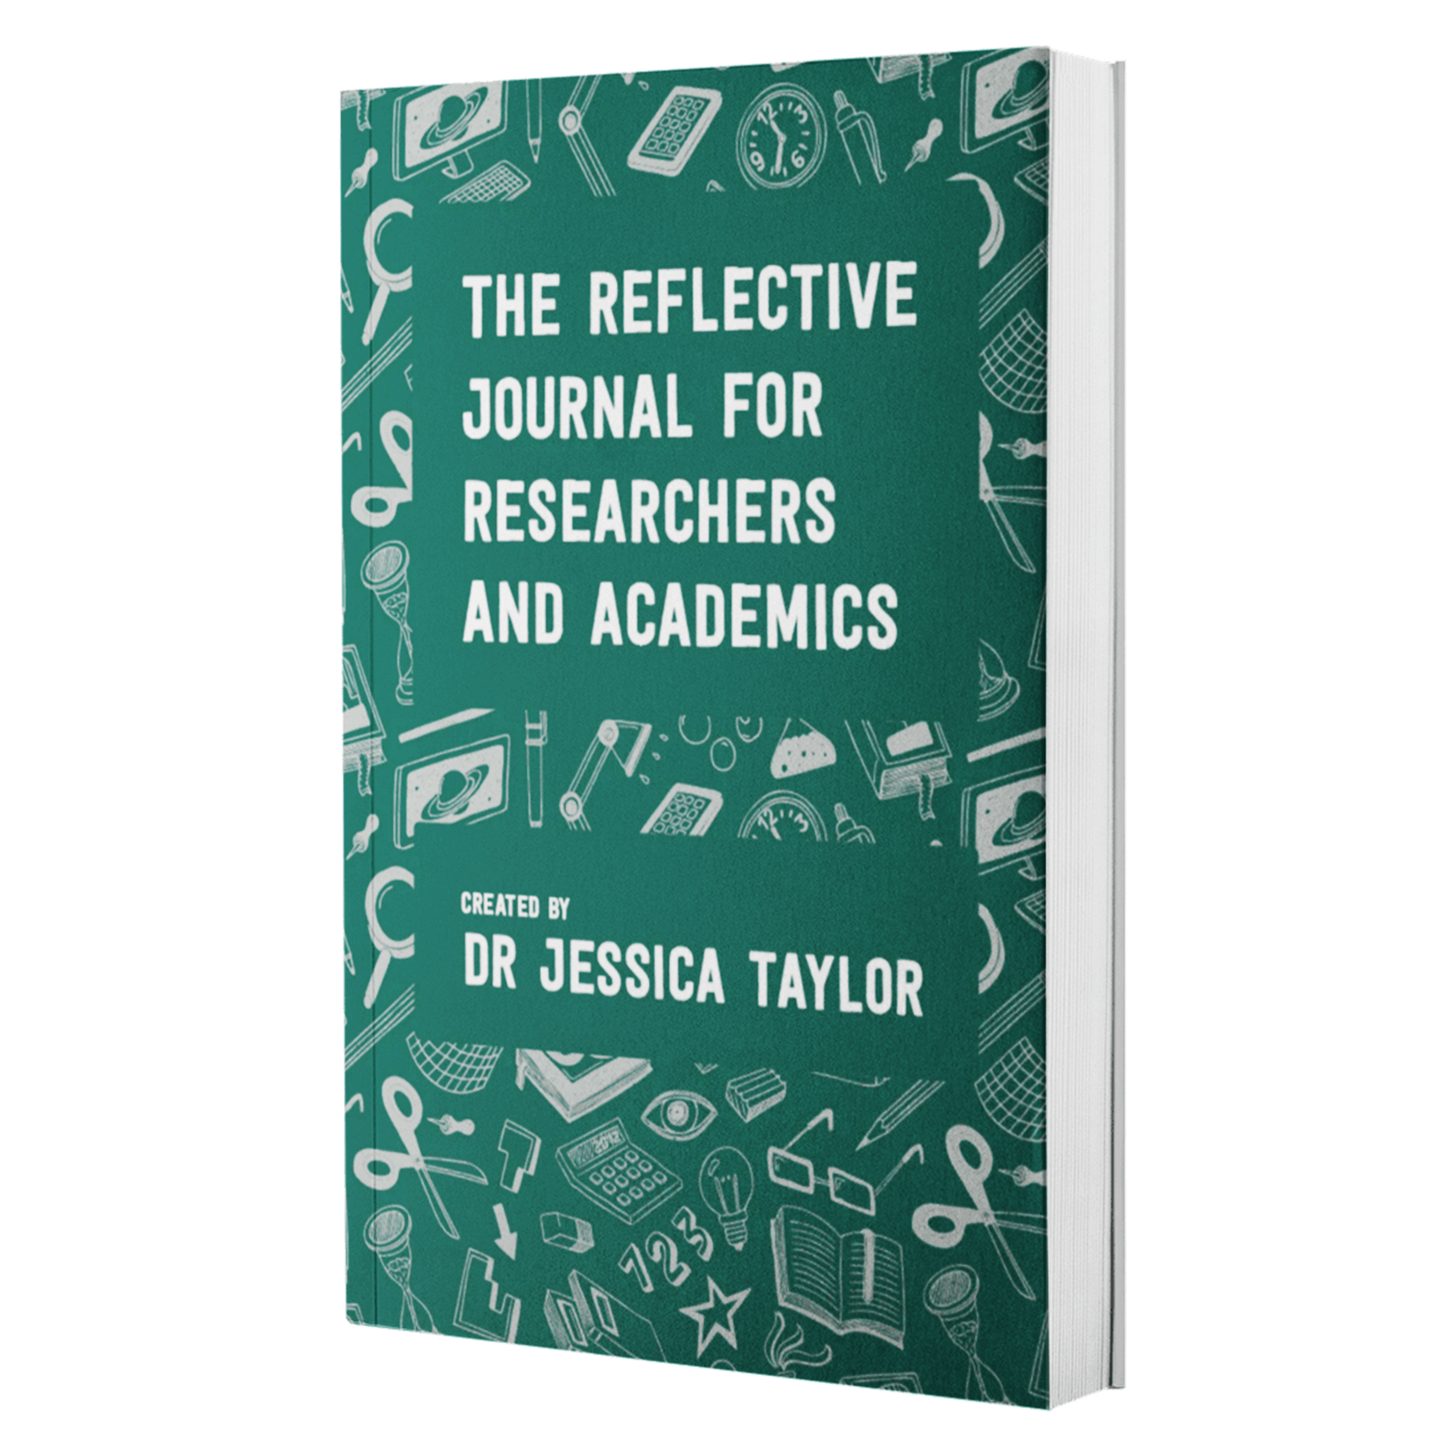 SIGNED & personalised: The Reflective Journal for Researchers and Academics